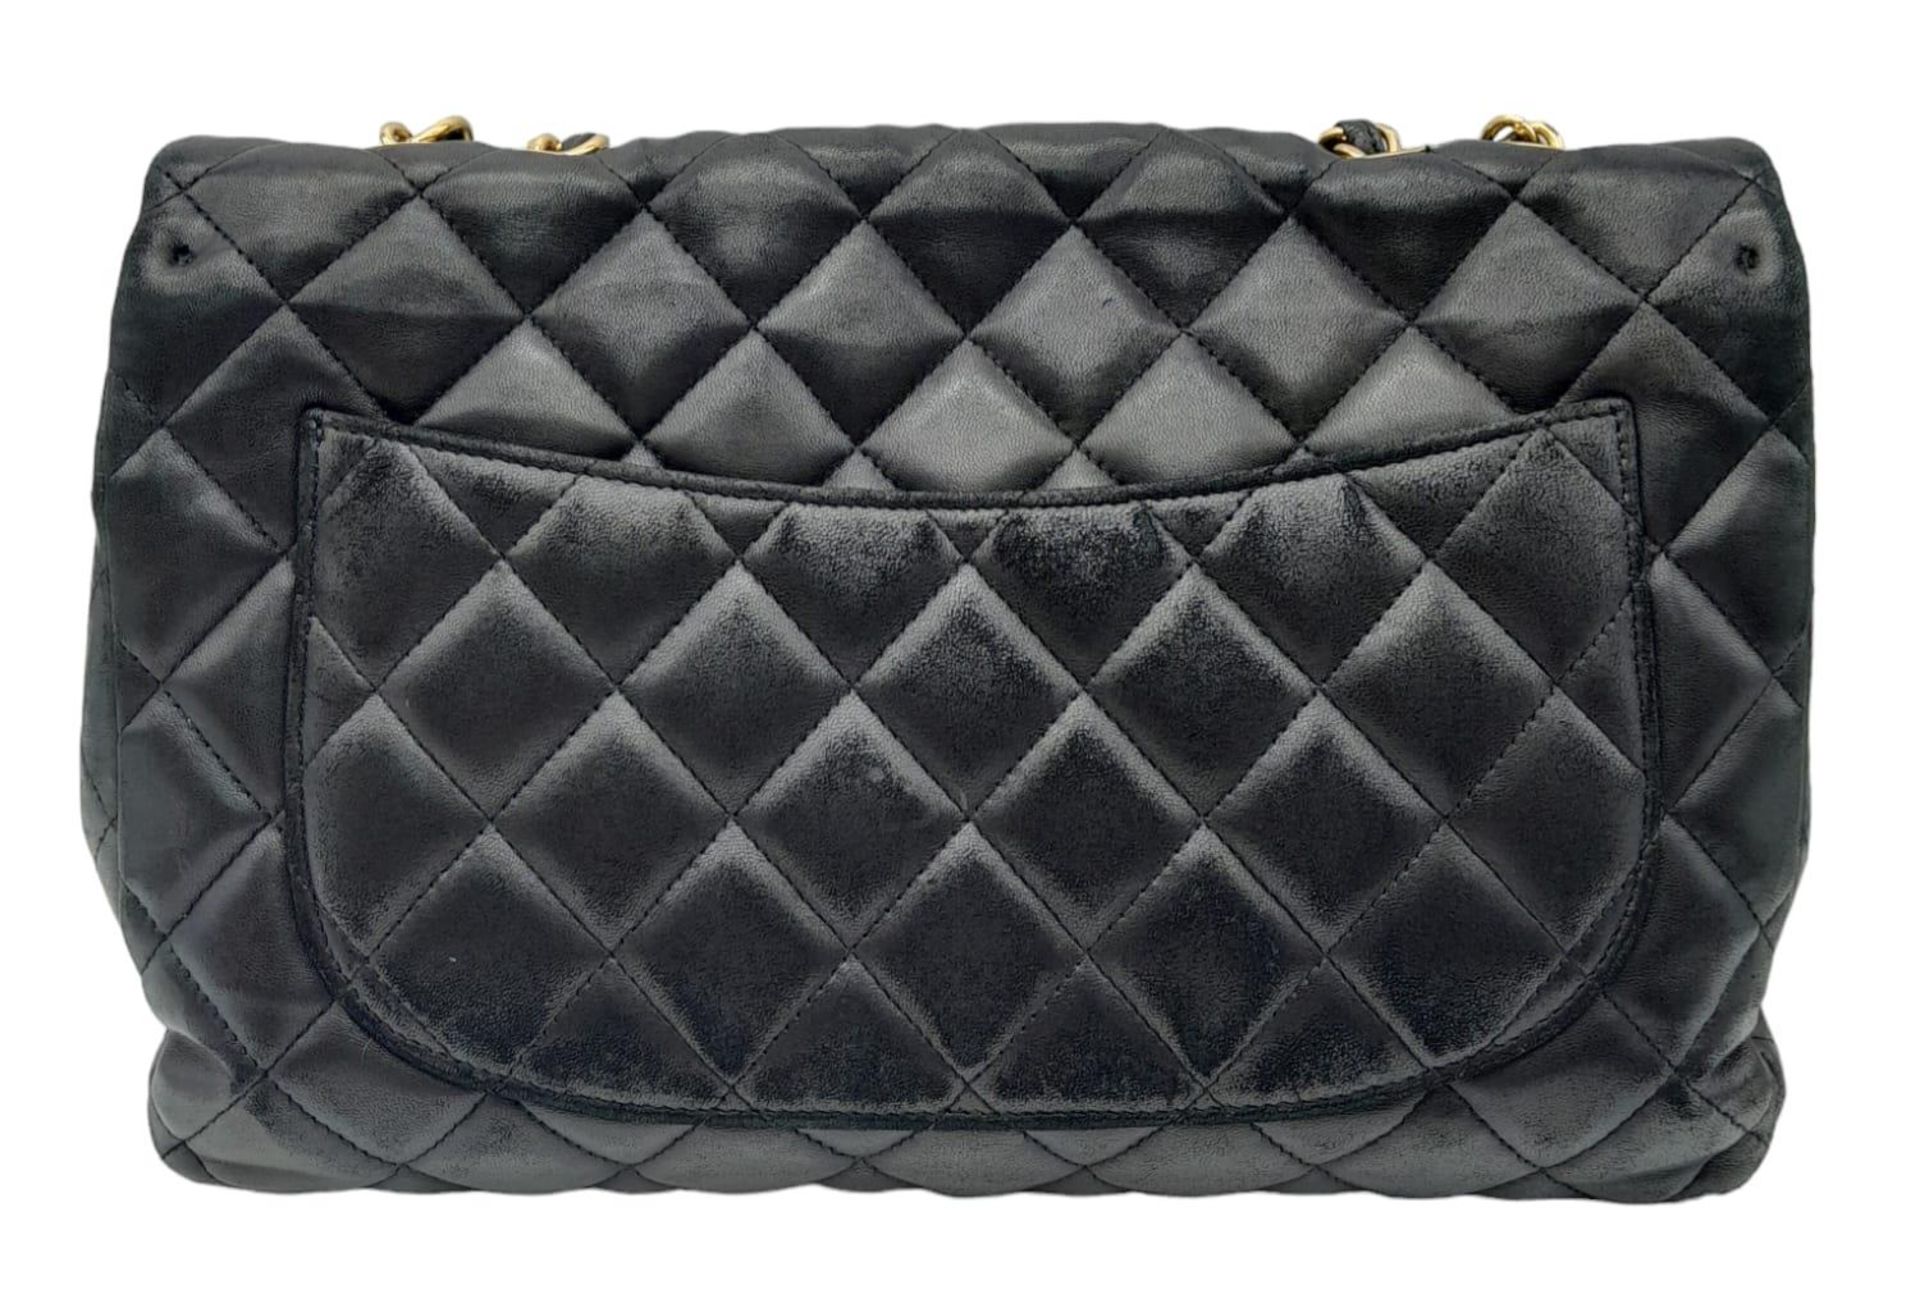 A Chanel Black Caviar Classic Single Flap Bag. Quilted pebbled leather exterior with gold-toned - Bild 7 aus 19